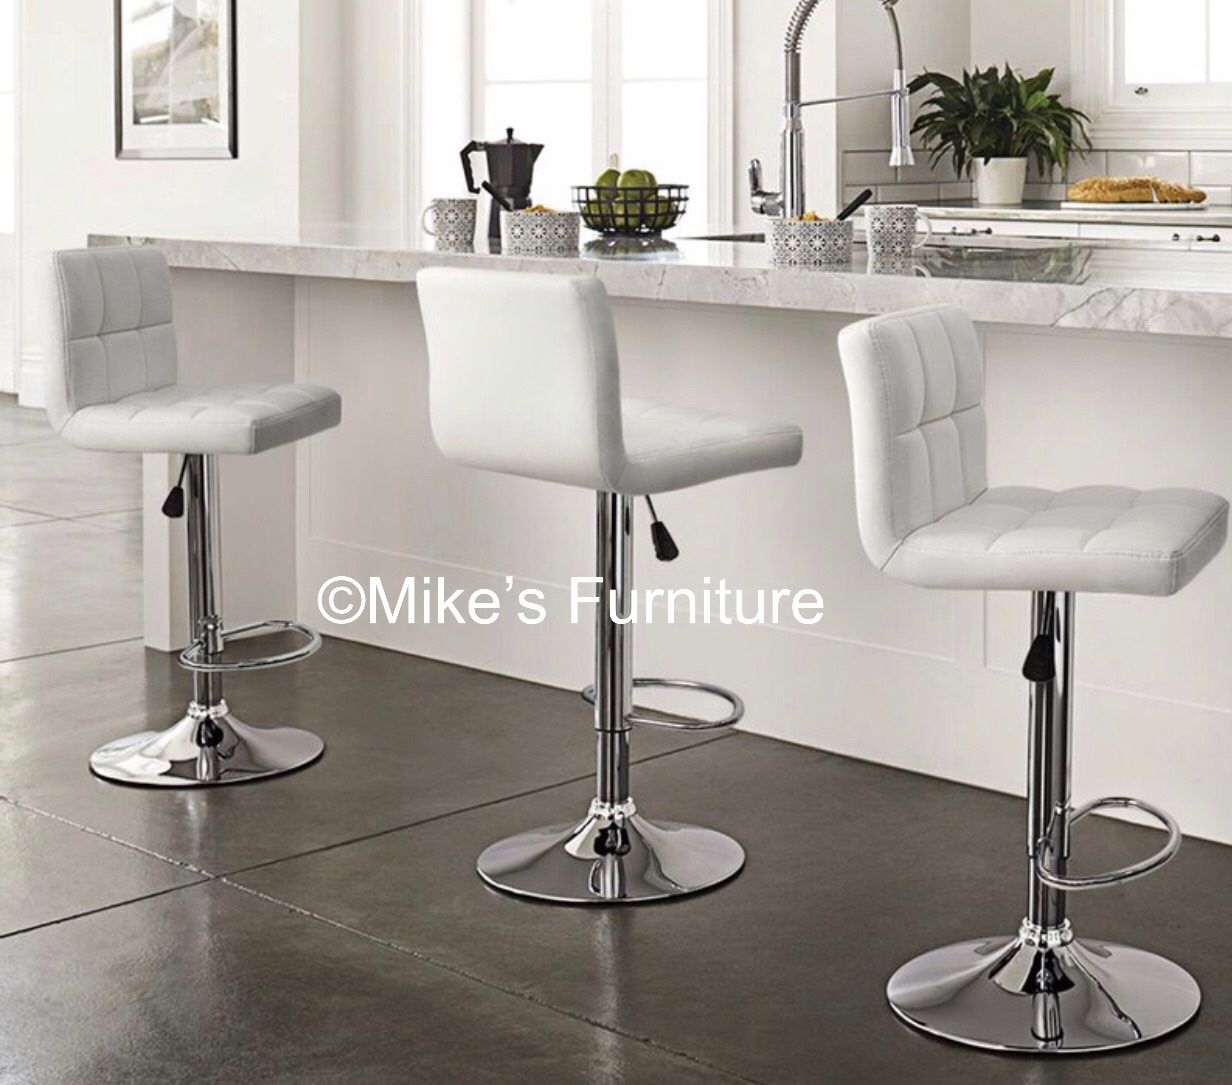  New Adjustable Bar Stools, barstools, barstool, bar stool, Sillas, Dining Chairs, chair, chairs, cadeiras (4 Colors: Black, White, Gray, Red)